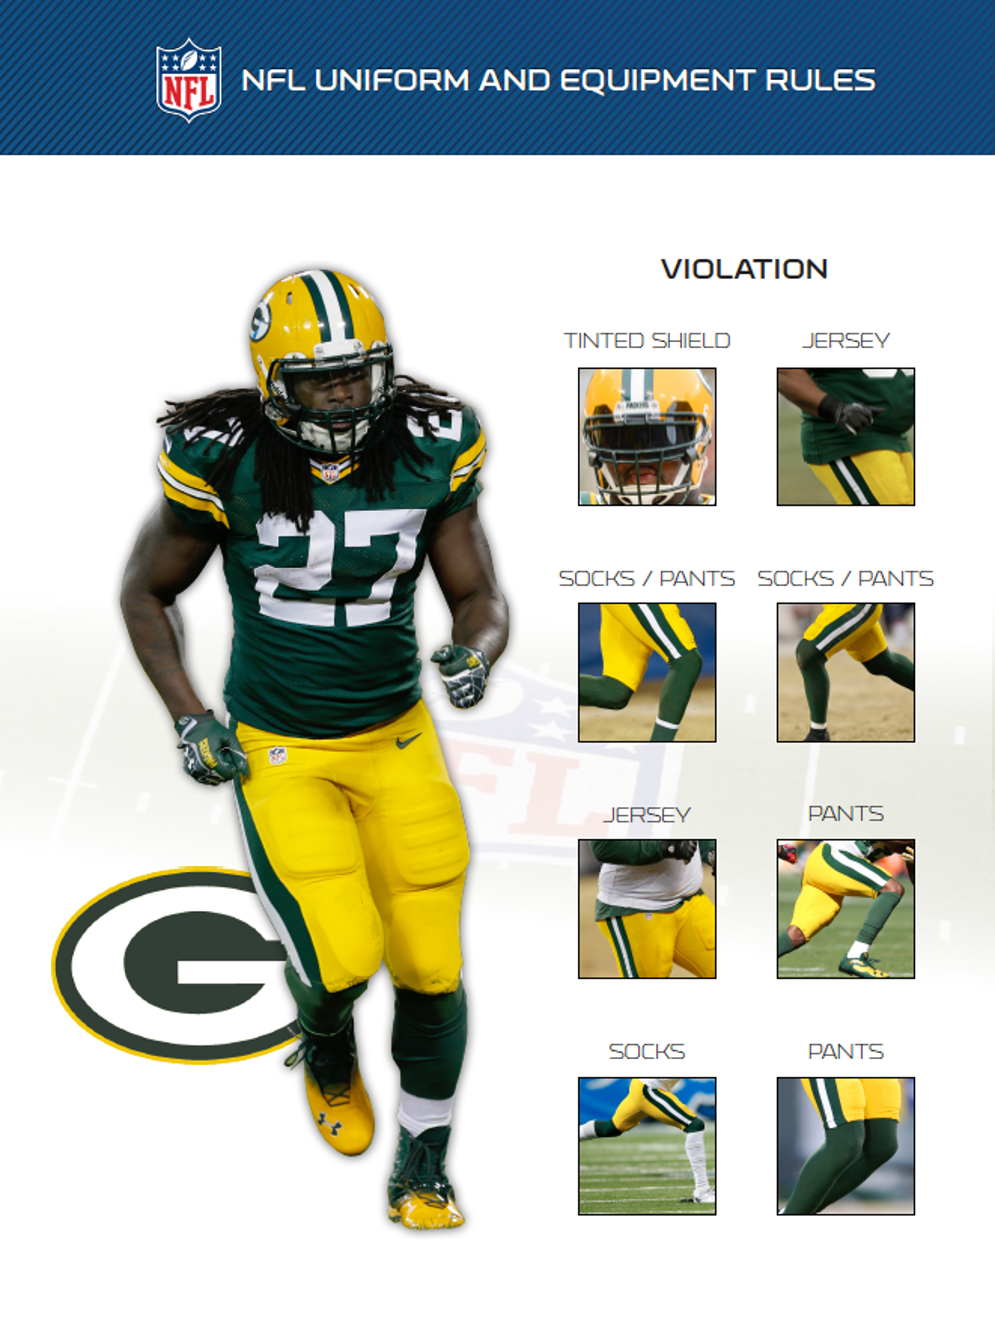 See how every NFL team&#x2019;s uniform and equipment should be worn and examples of violations.